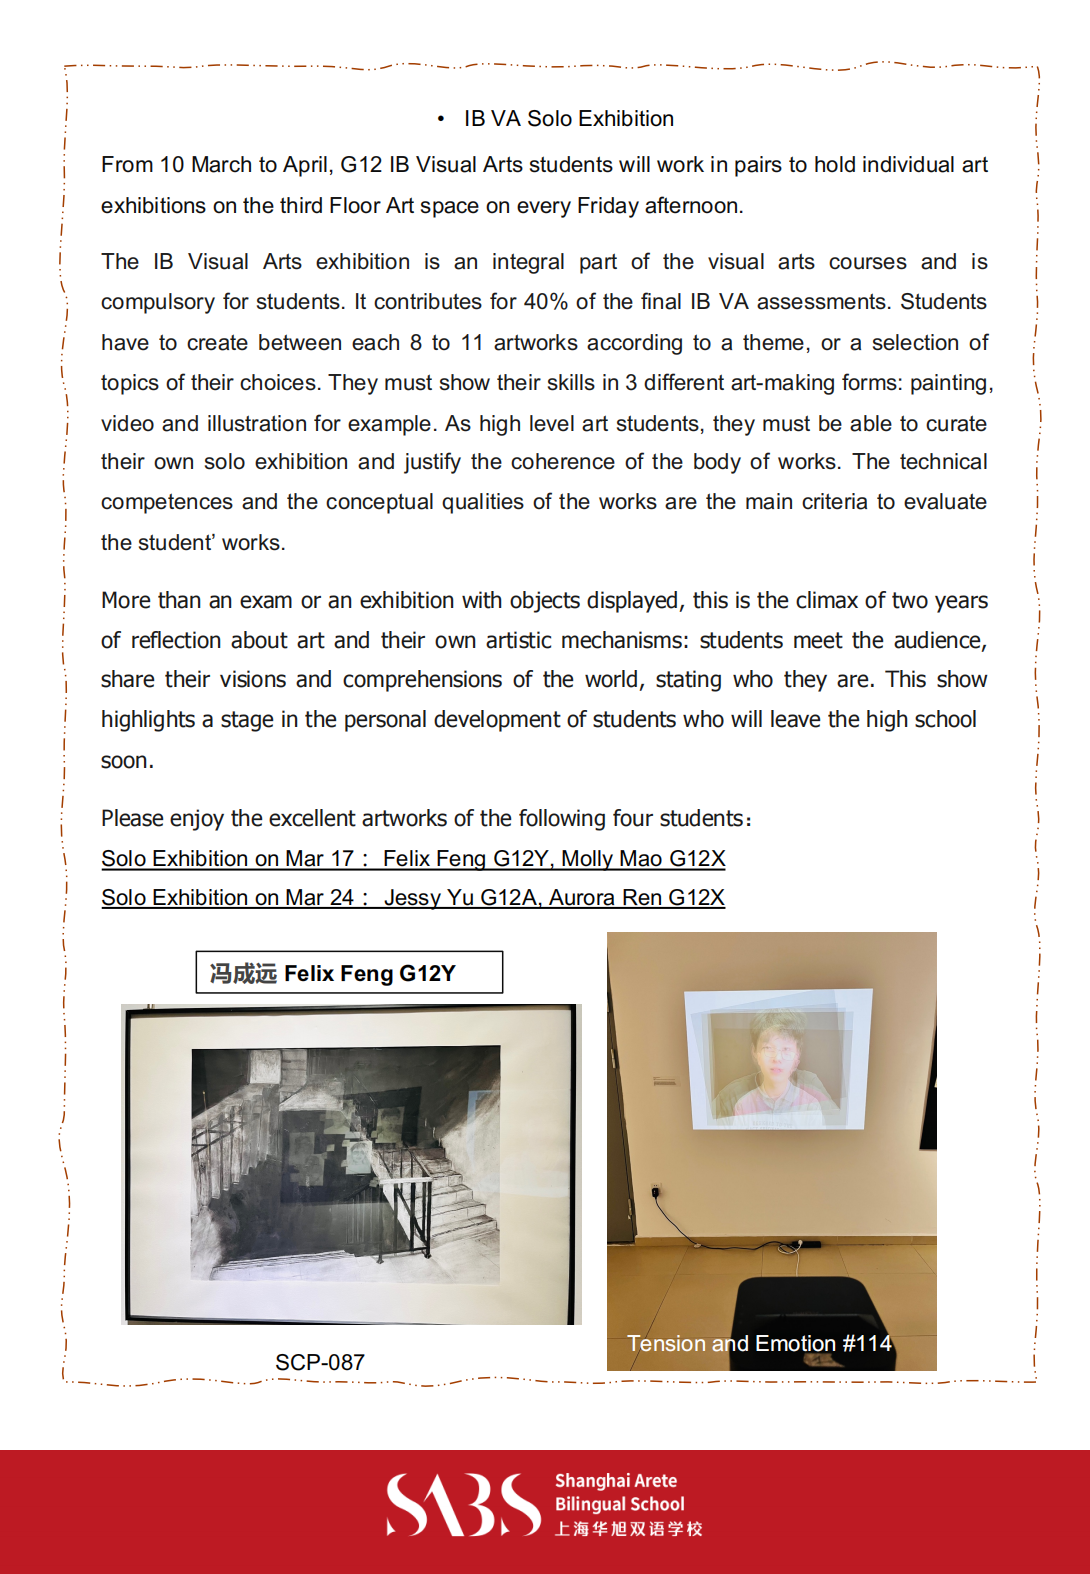 HS 3rd Issue Newsletter pptx（English）_09.png